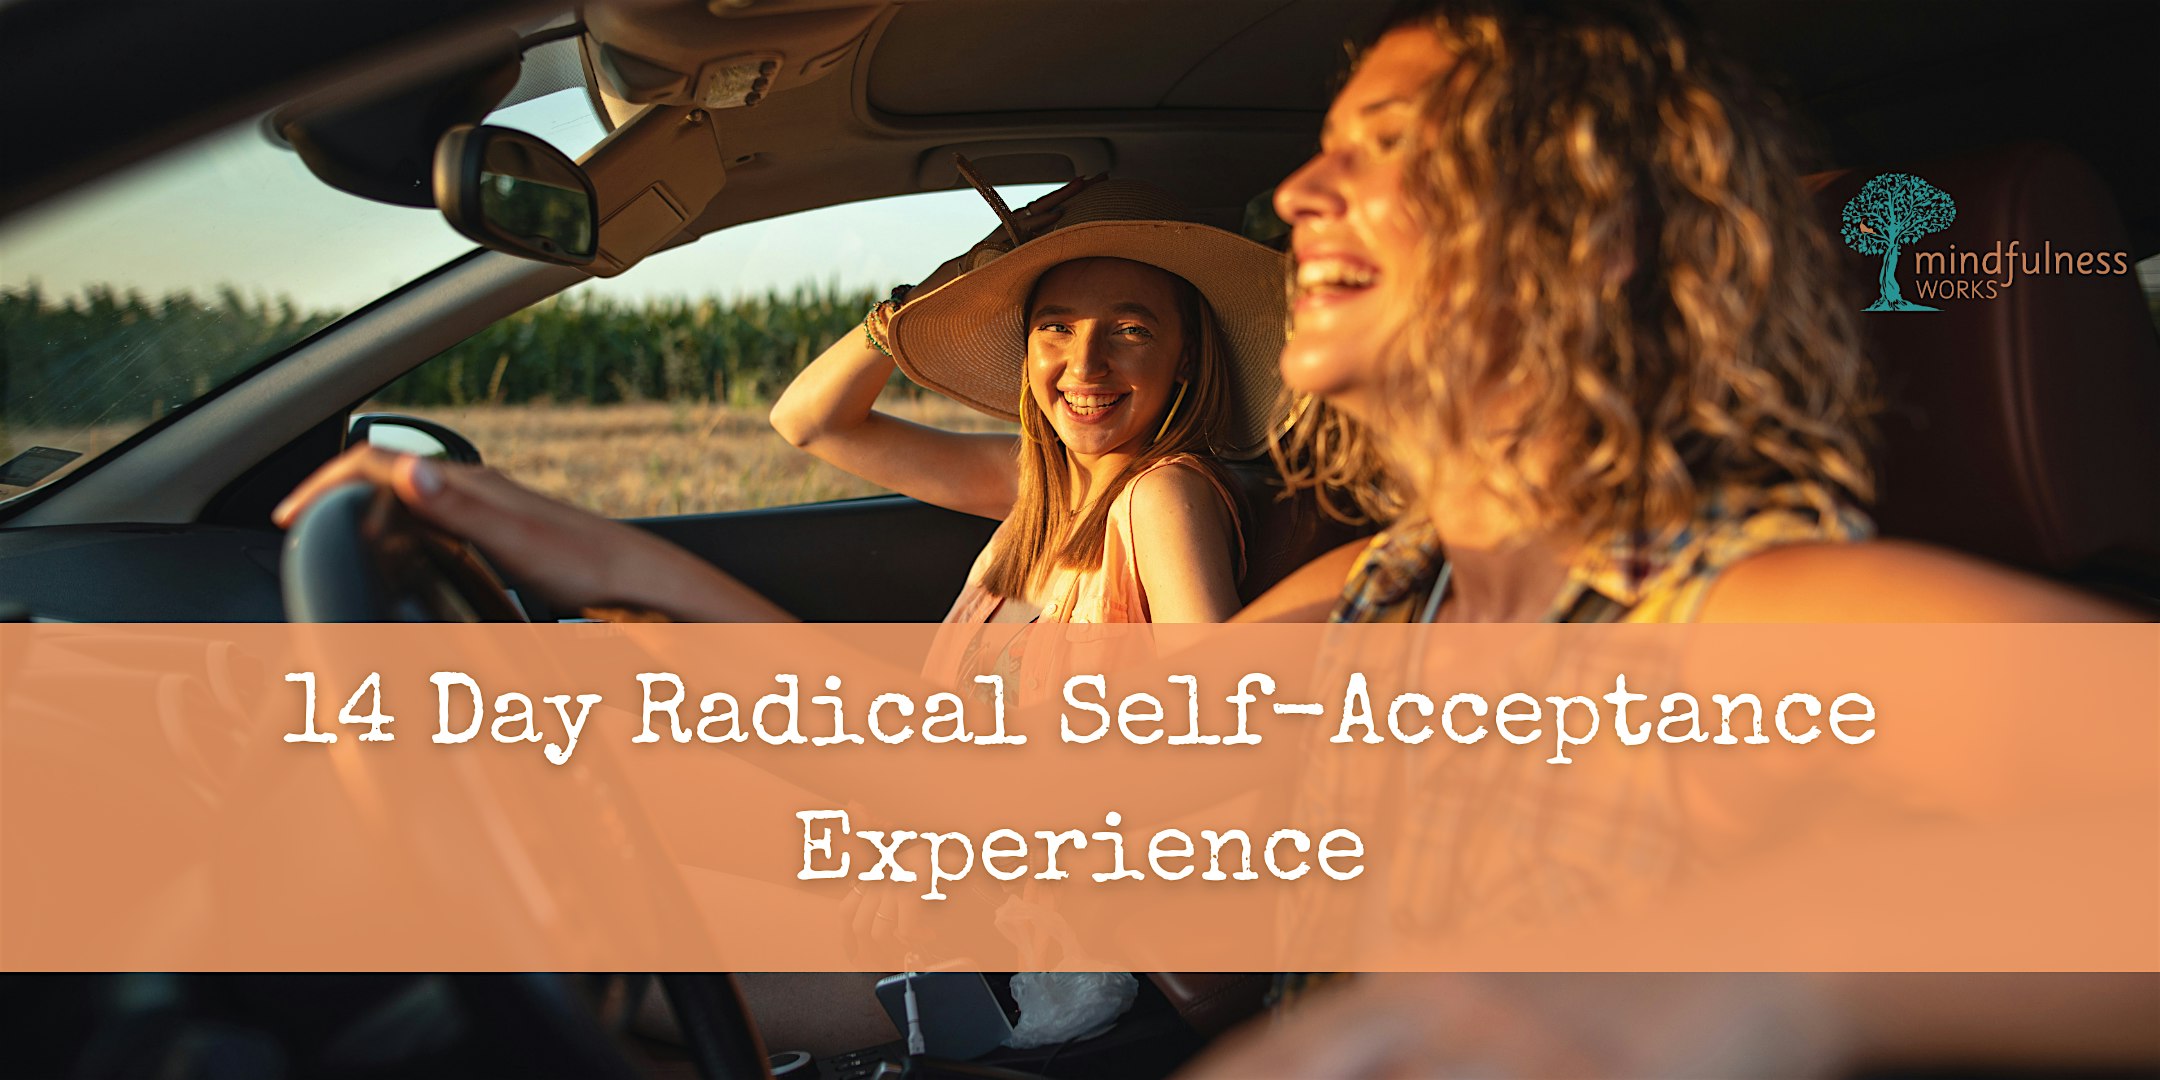 14 Day Radical Self-Acceptance Experience